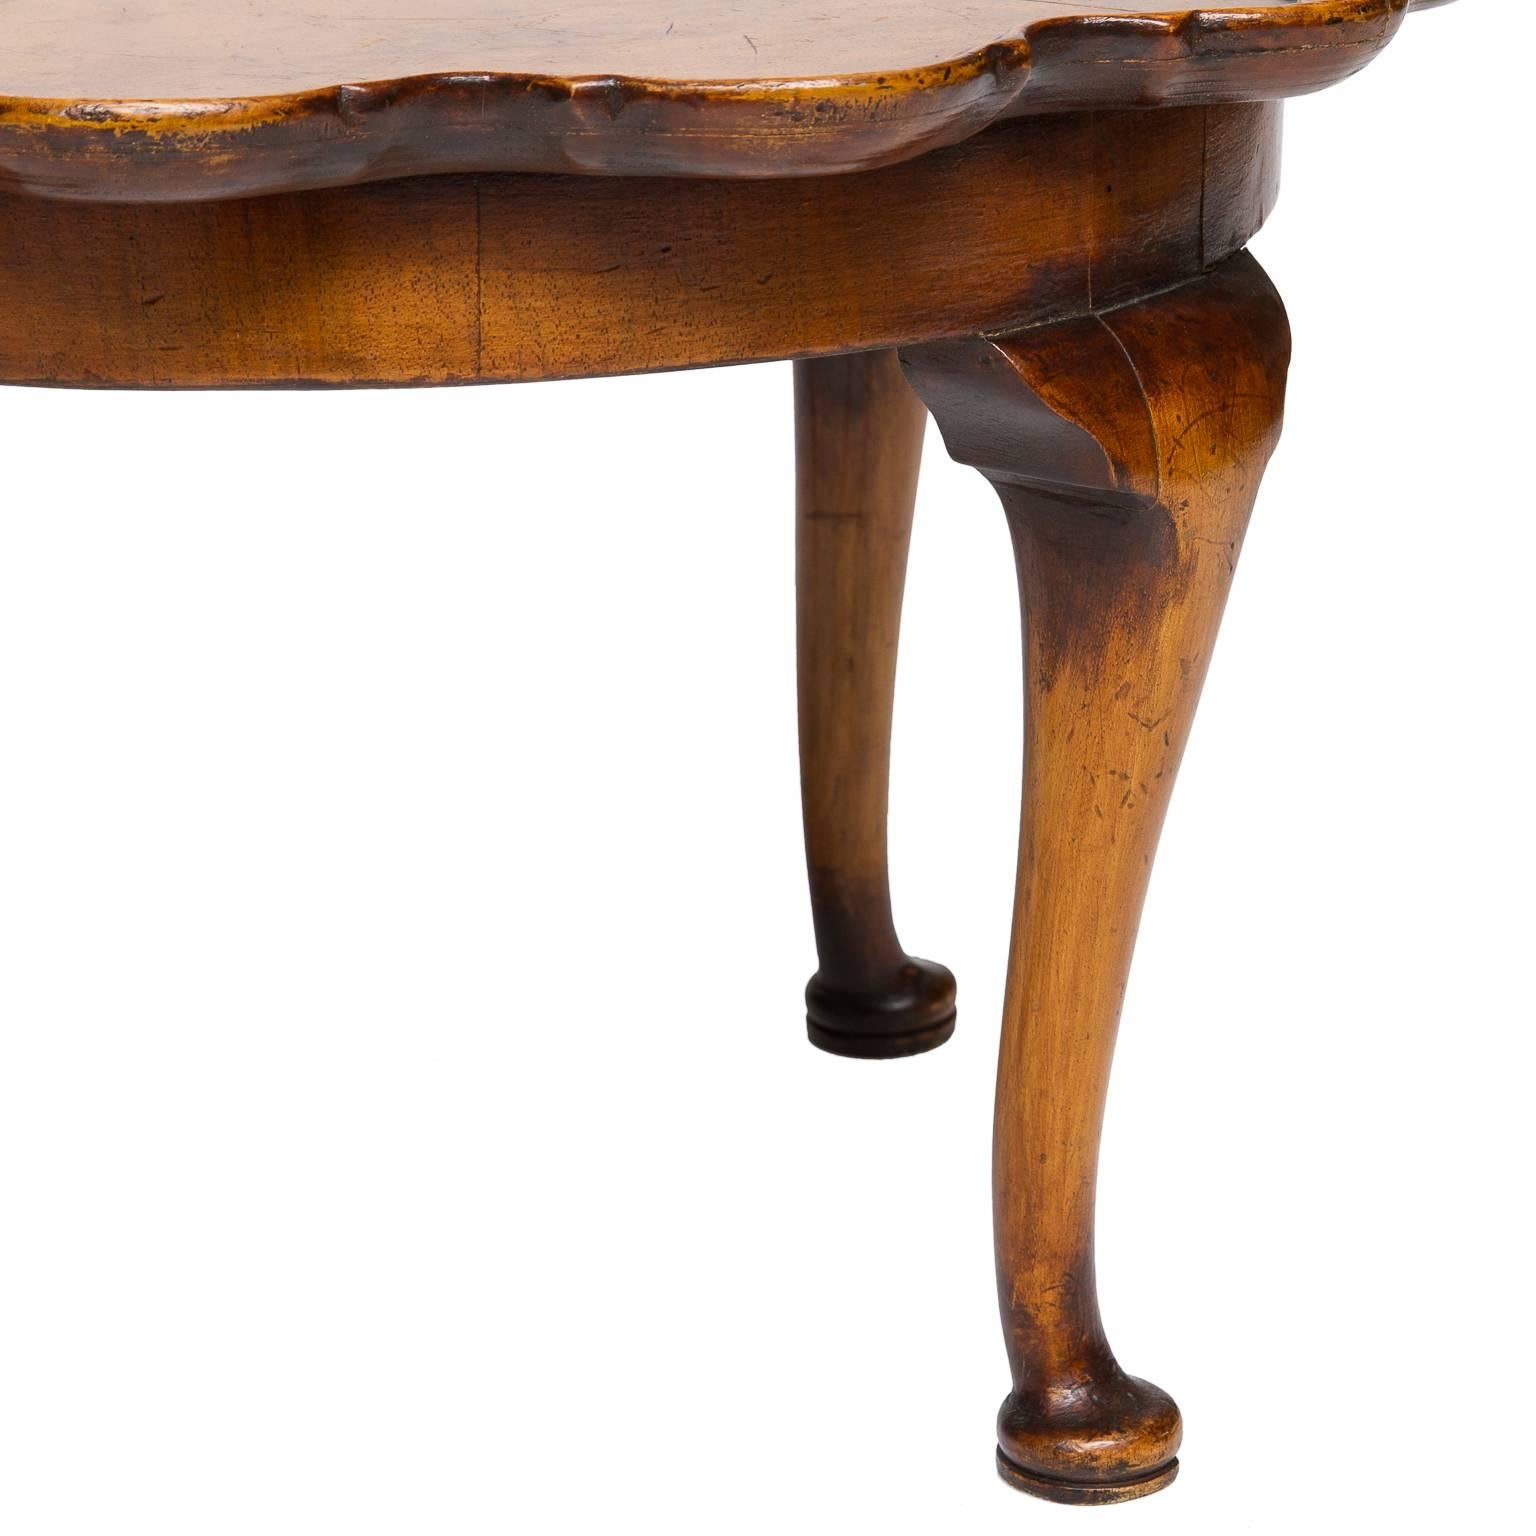 A lovely petite pie crust table made from walnut. Nice faded legs. Bookmatched figured walnut top,(some wear to the top), kind of neat look though. Can be blended easily with wax. The table scalloped design with raised walnut moldings. The top is